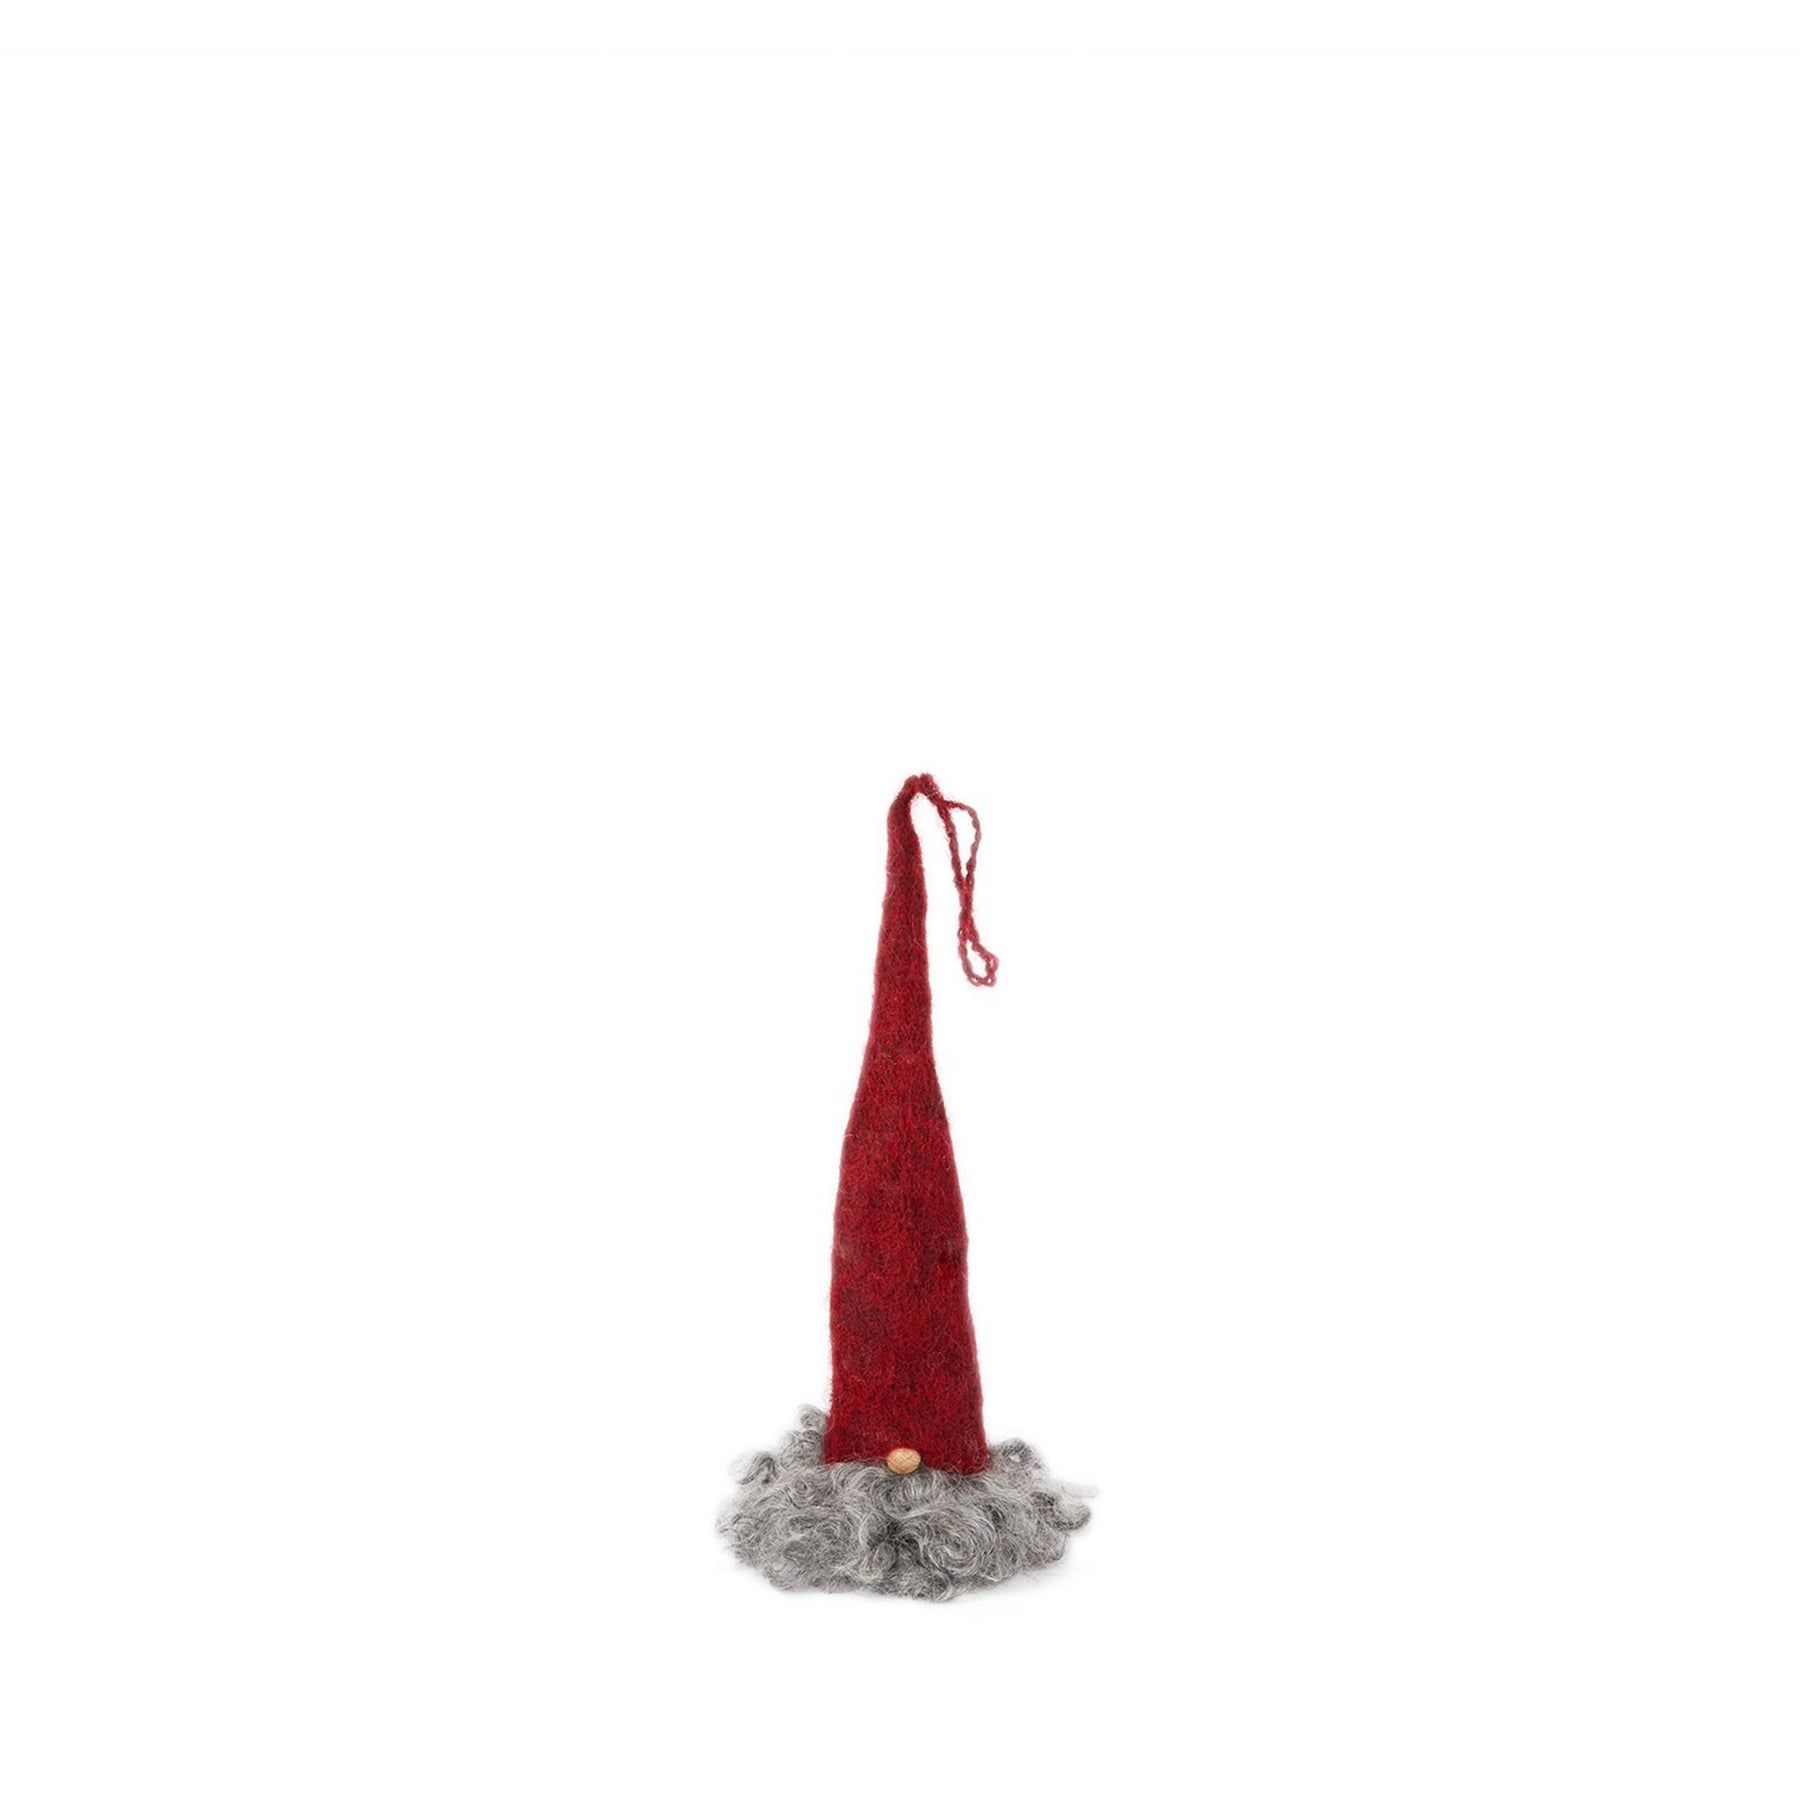 Gnome Ornament in Red with Grey Beard Zoom Image 1